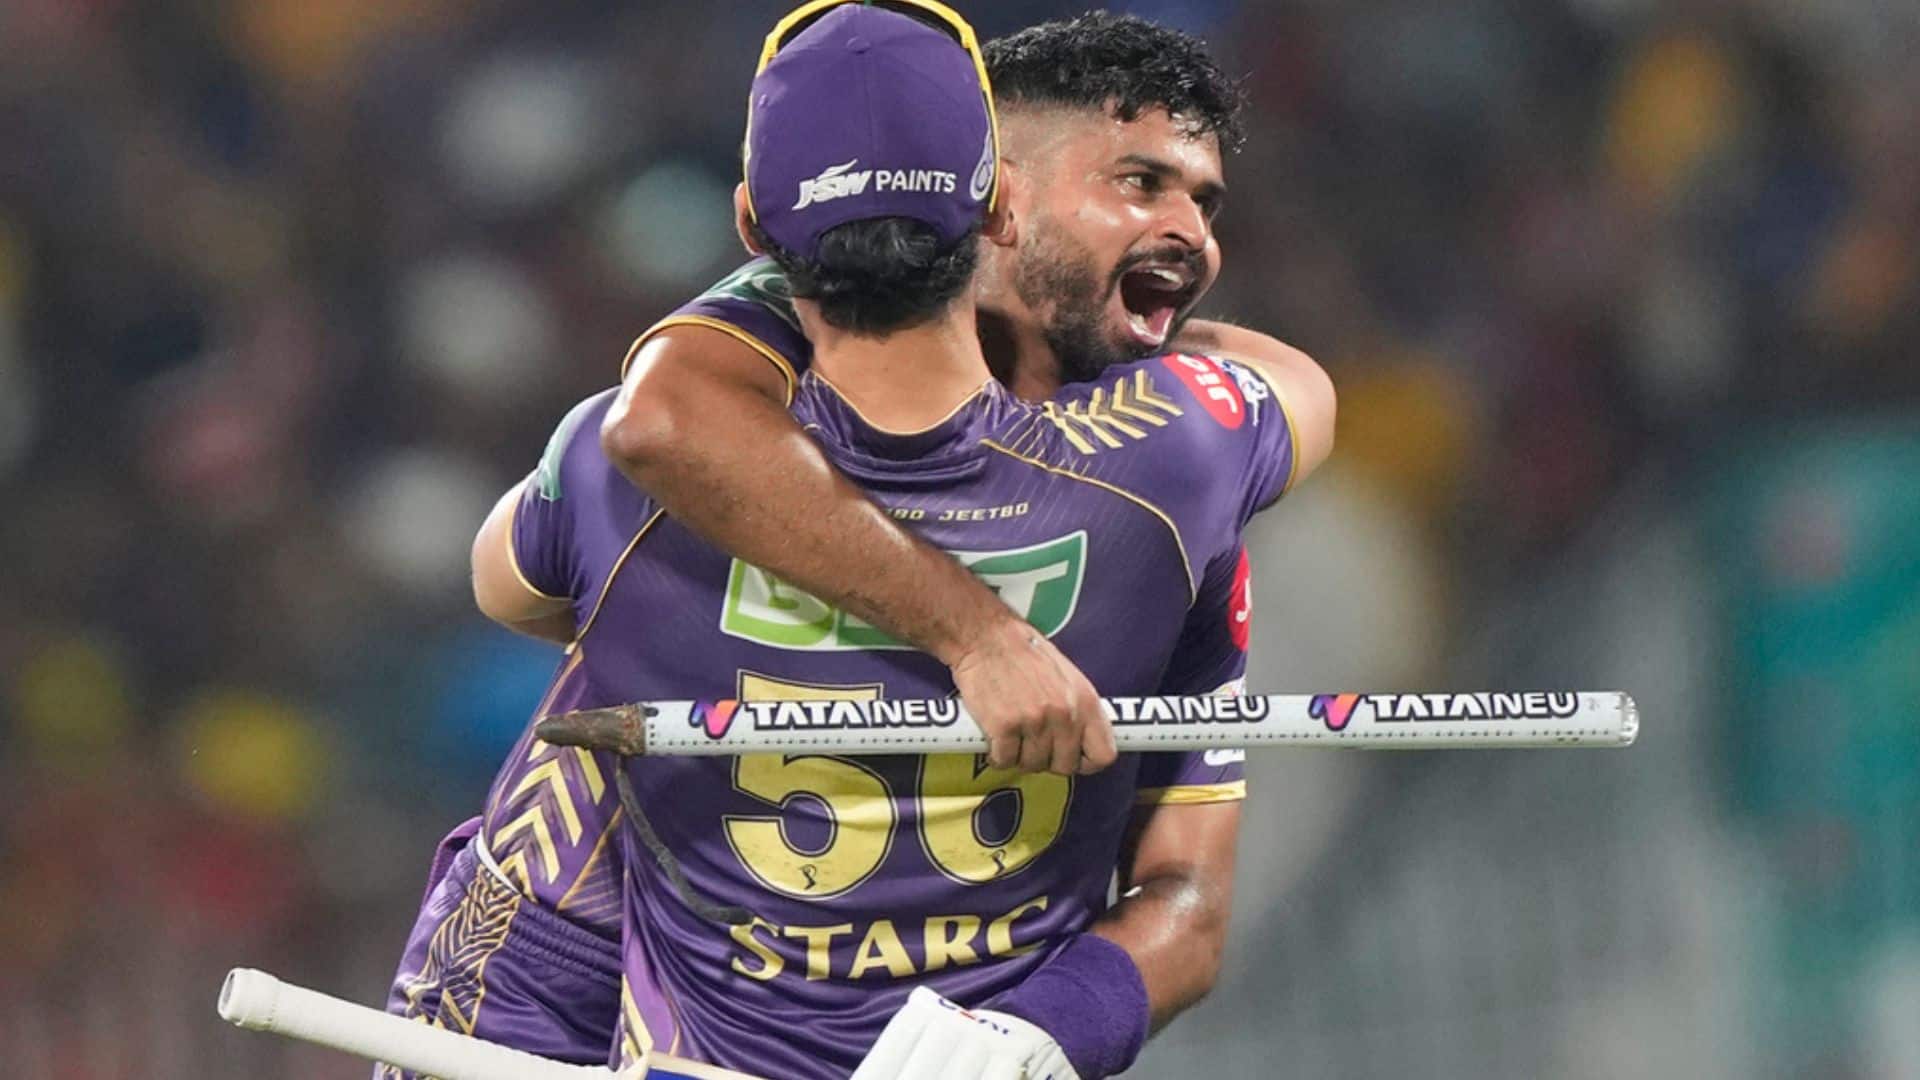 Iyer was ecstatic after the victory [AP]